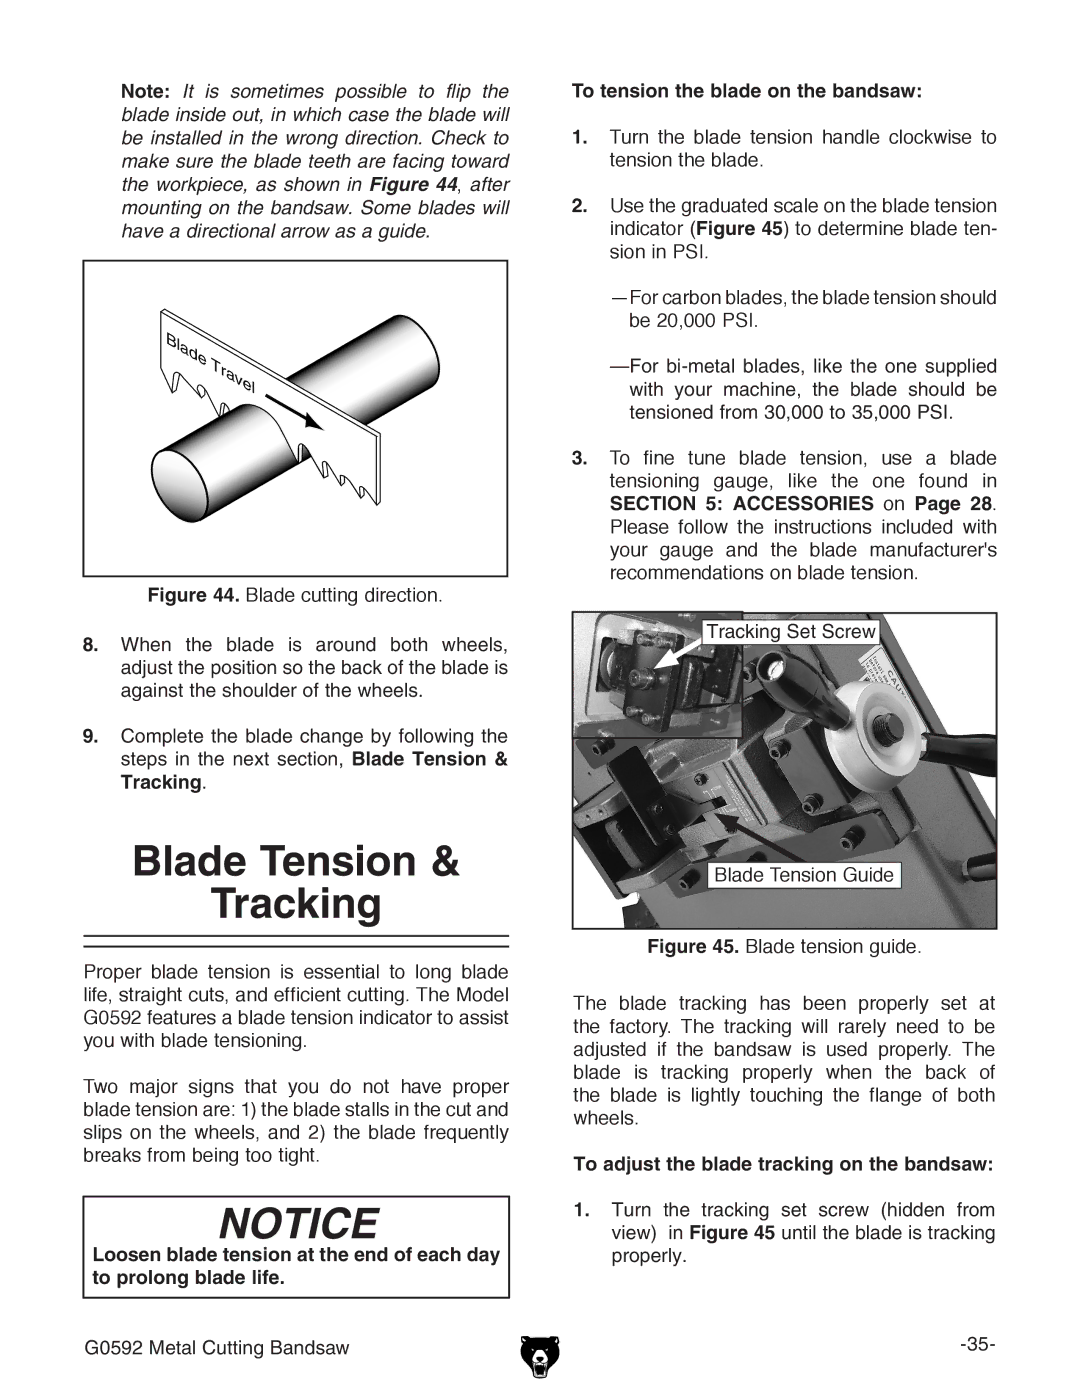 Grizzly G0592 Blade Tension Tracking, To tension the blade on the bandsaw, To adjust the blade tracking on the bandsaw 